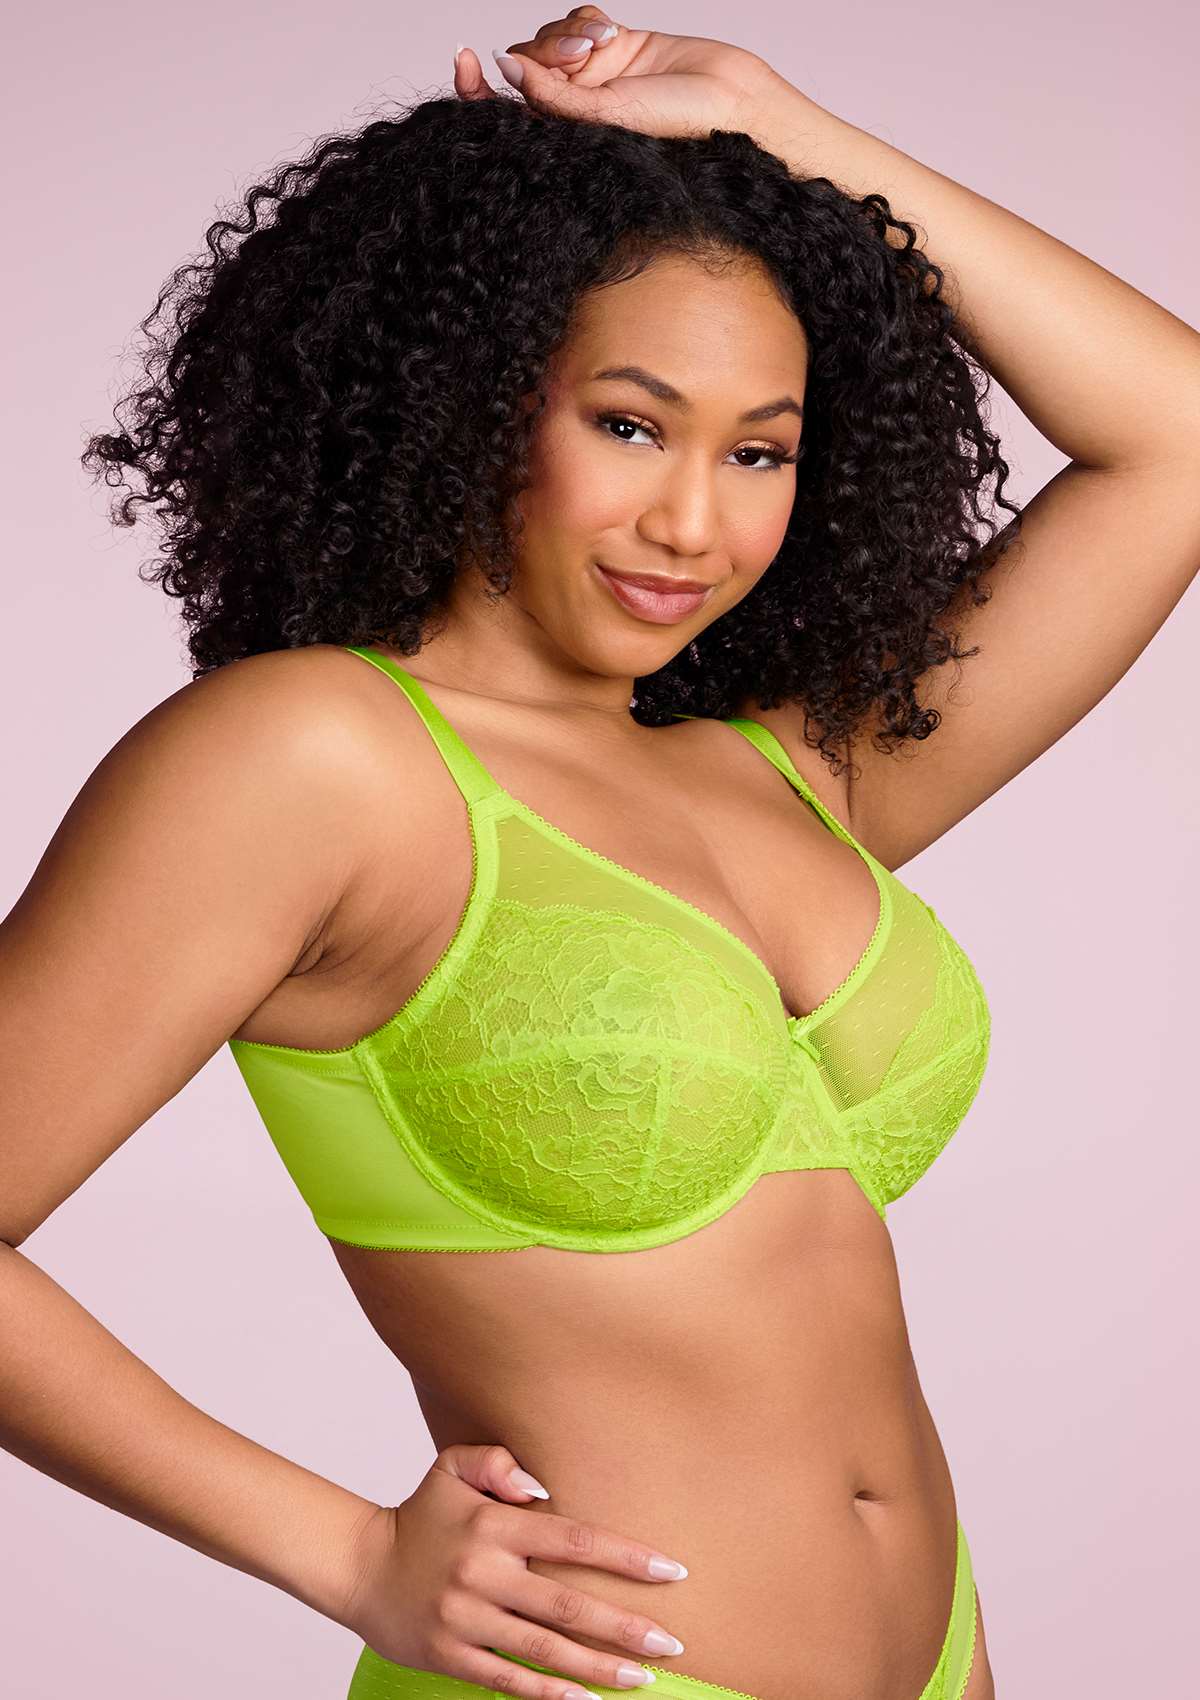 HSIA Enchante Full Cup Minimizing Bra: Supportive Unlined Lace Bra - Lime Green / 44 / D